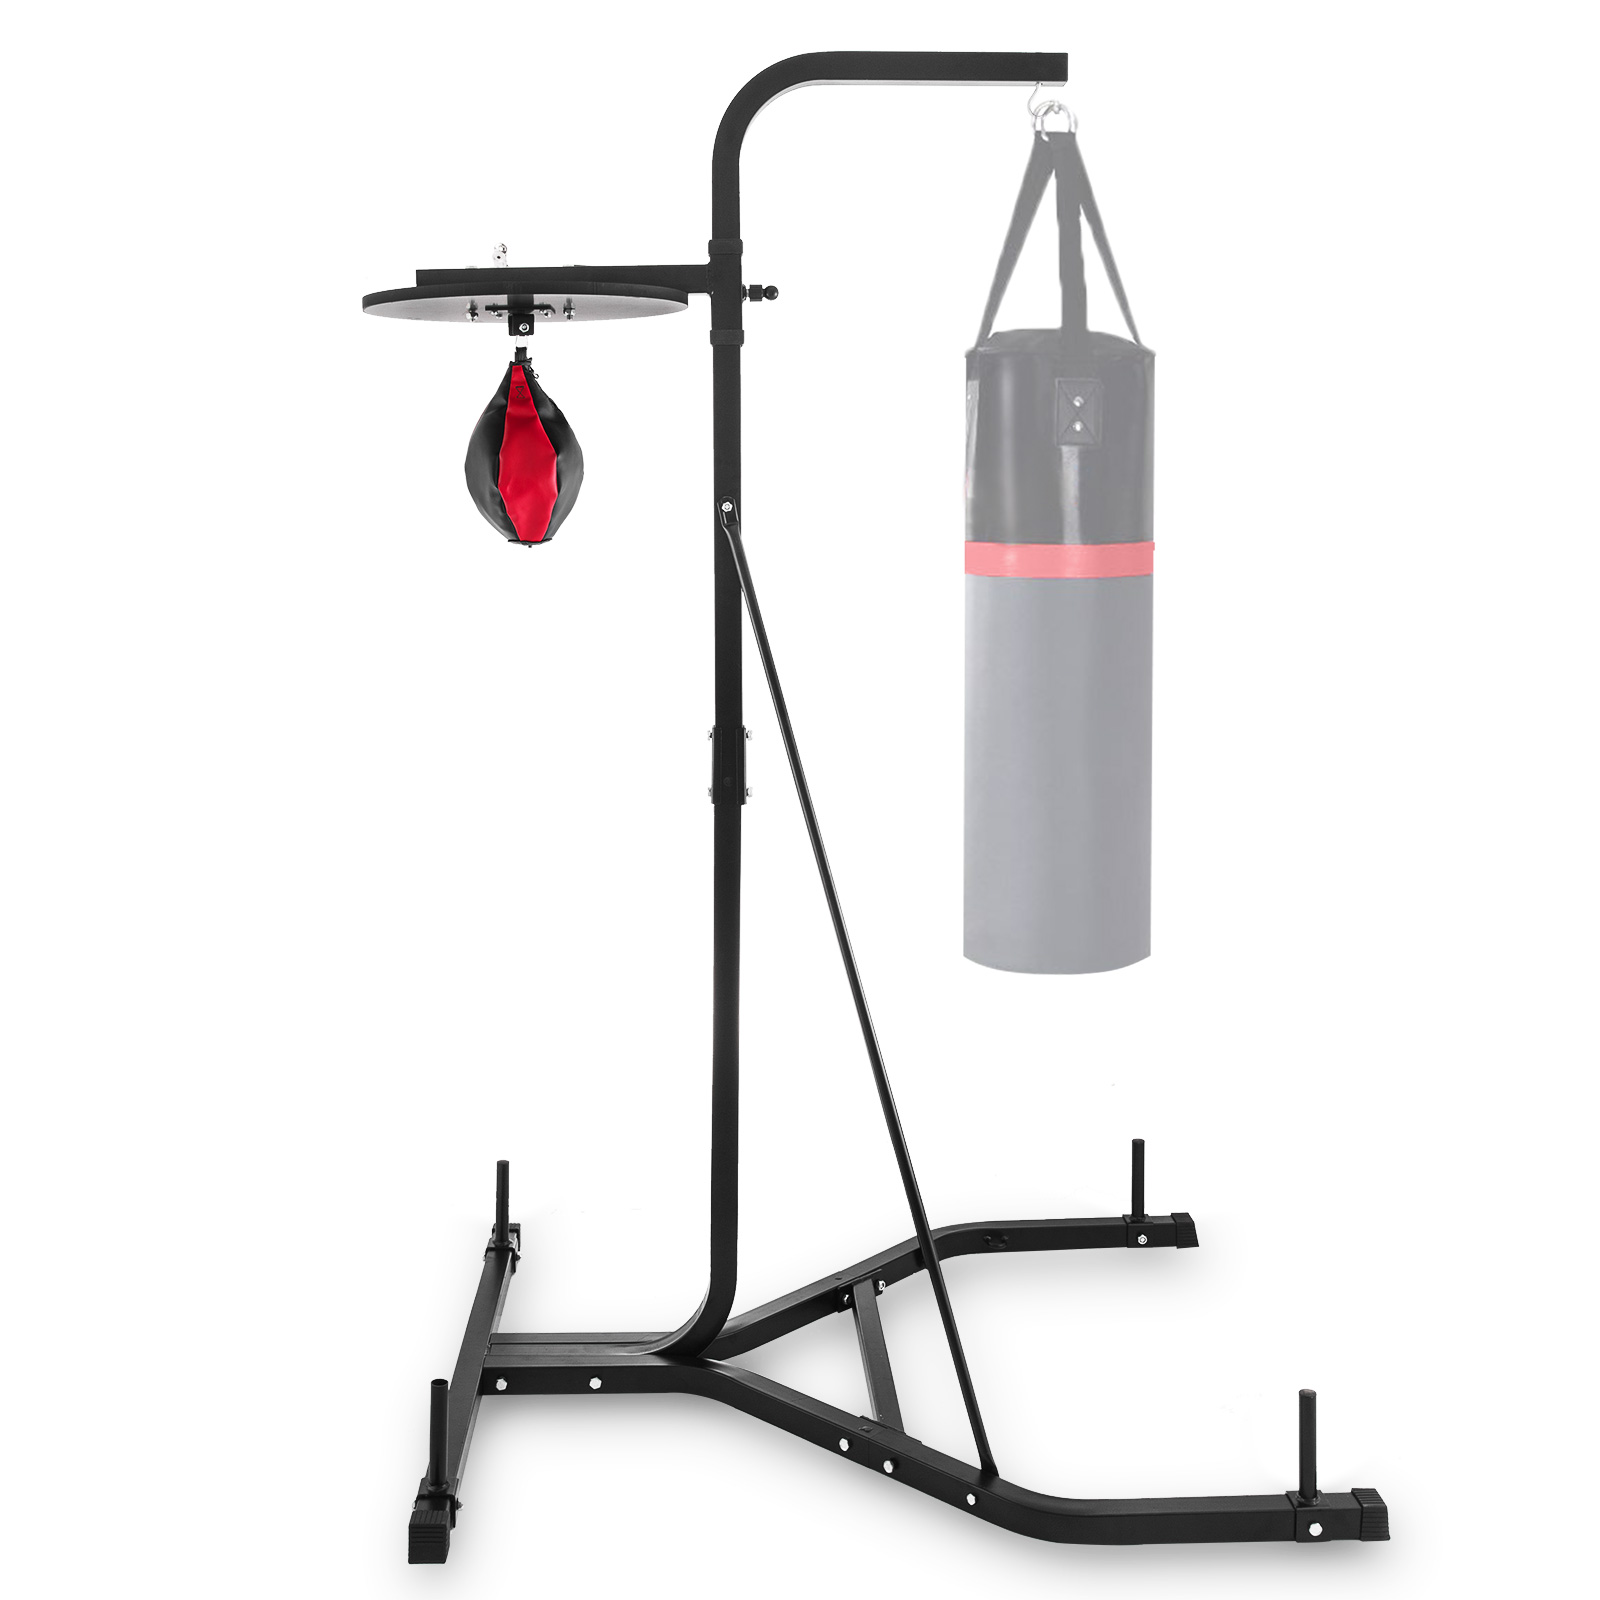 2in1 Foldable Boxing Bag Stand Pull Up Station Punch Bag Frame Exercise Fitness | eBay